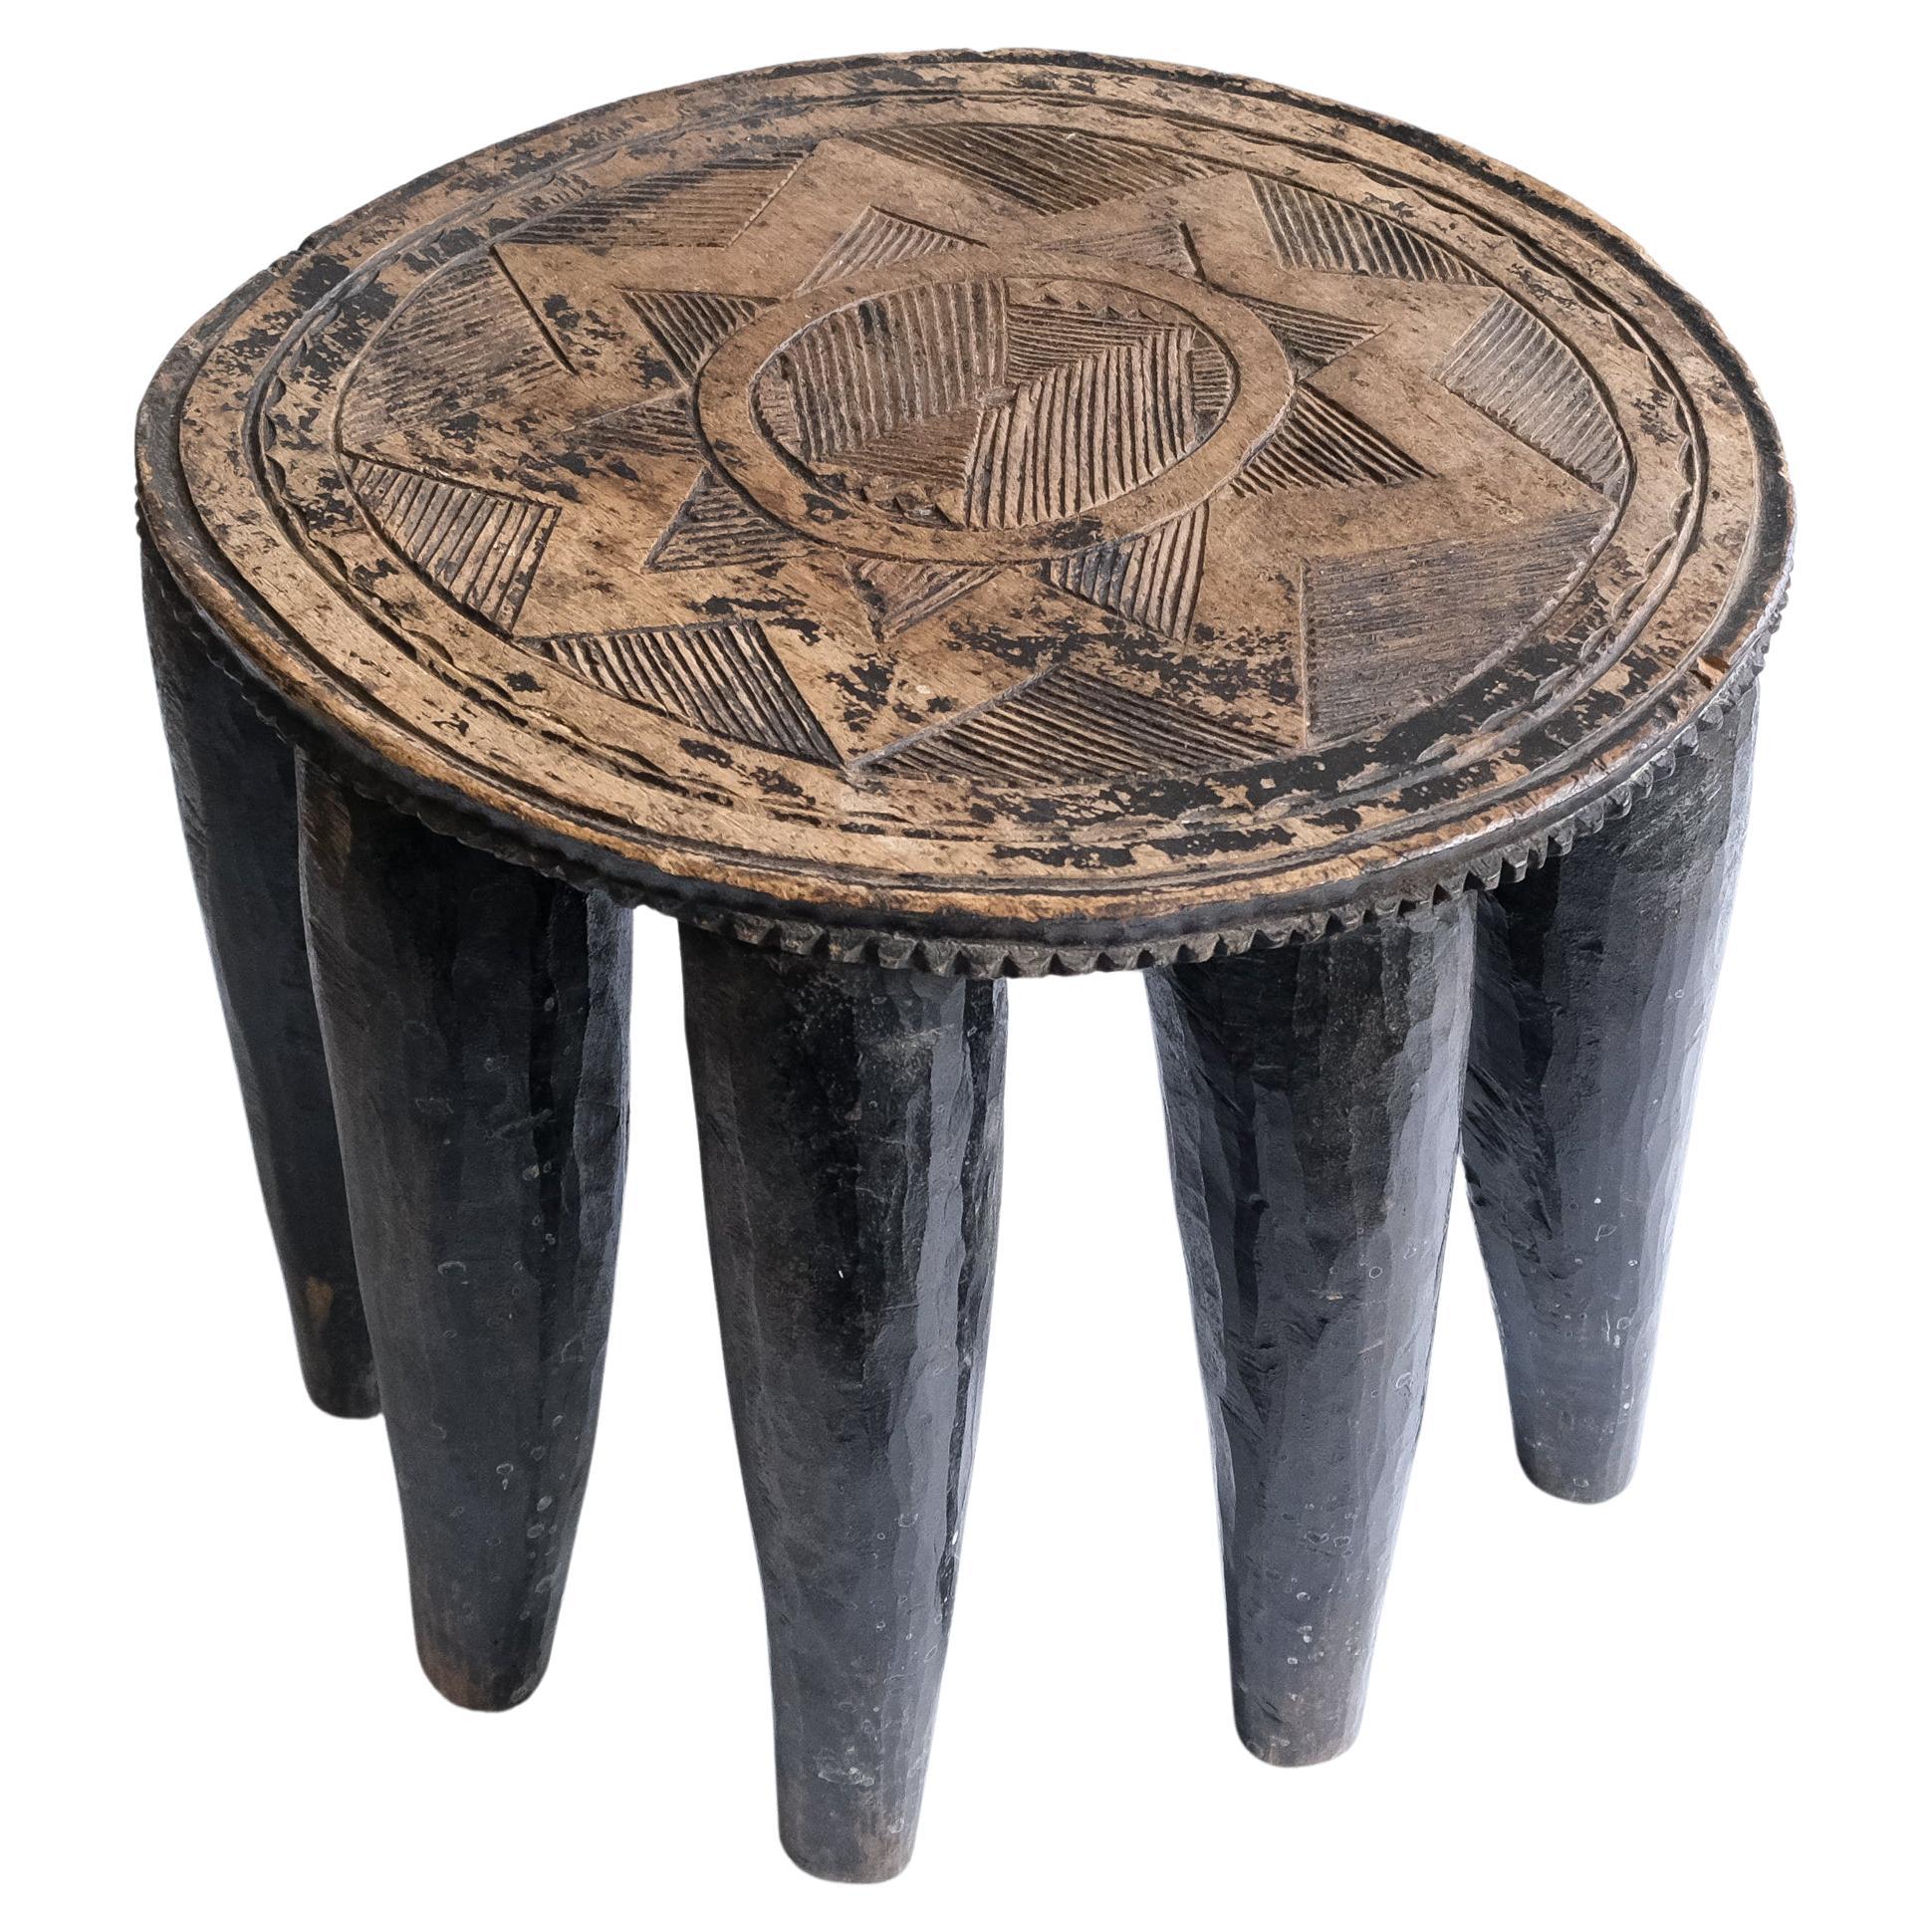 20th Century African Ten-Legged Nupe Stool or Table, Nigeria c.1950s